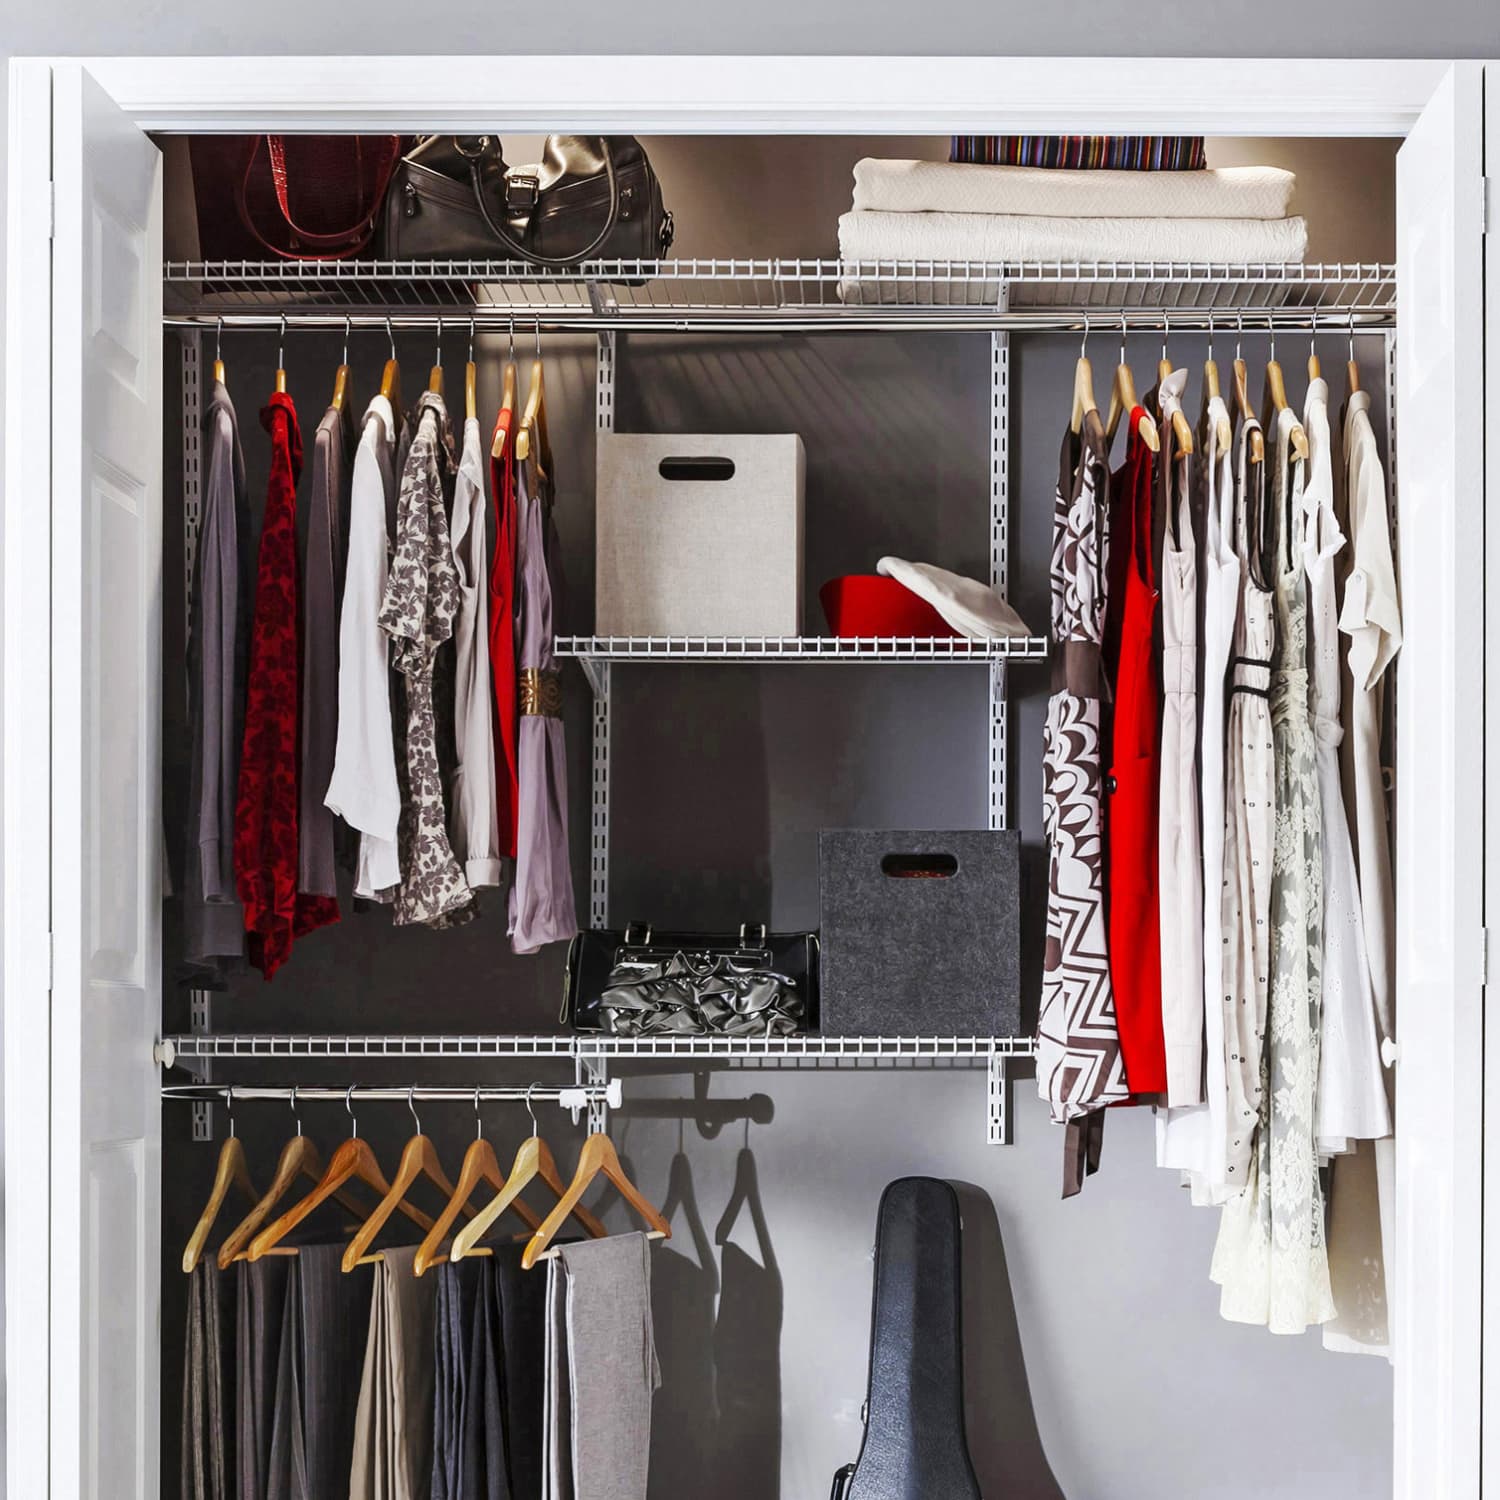 Rubbermaid Configurations Deluxe Closet Kit Review